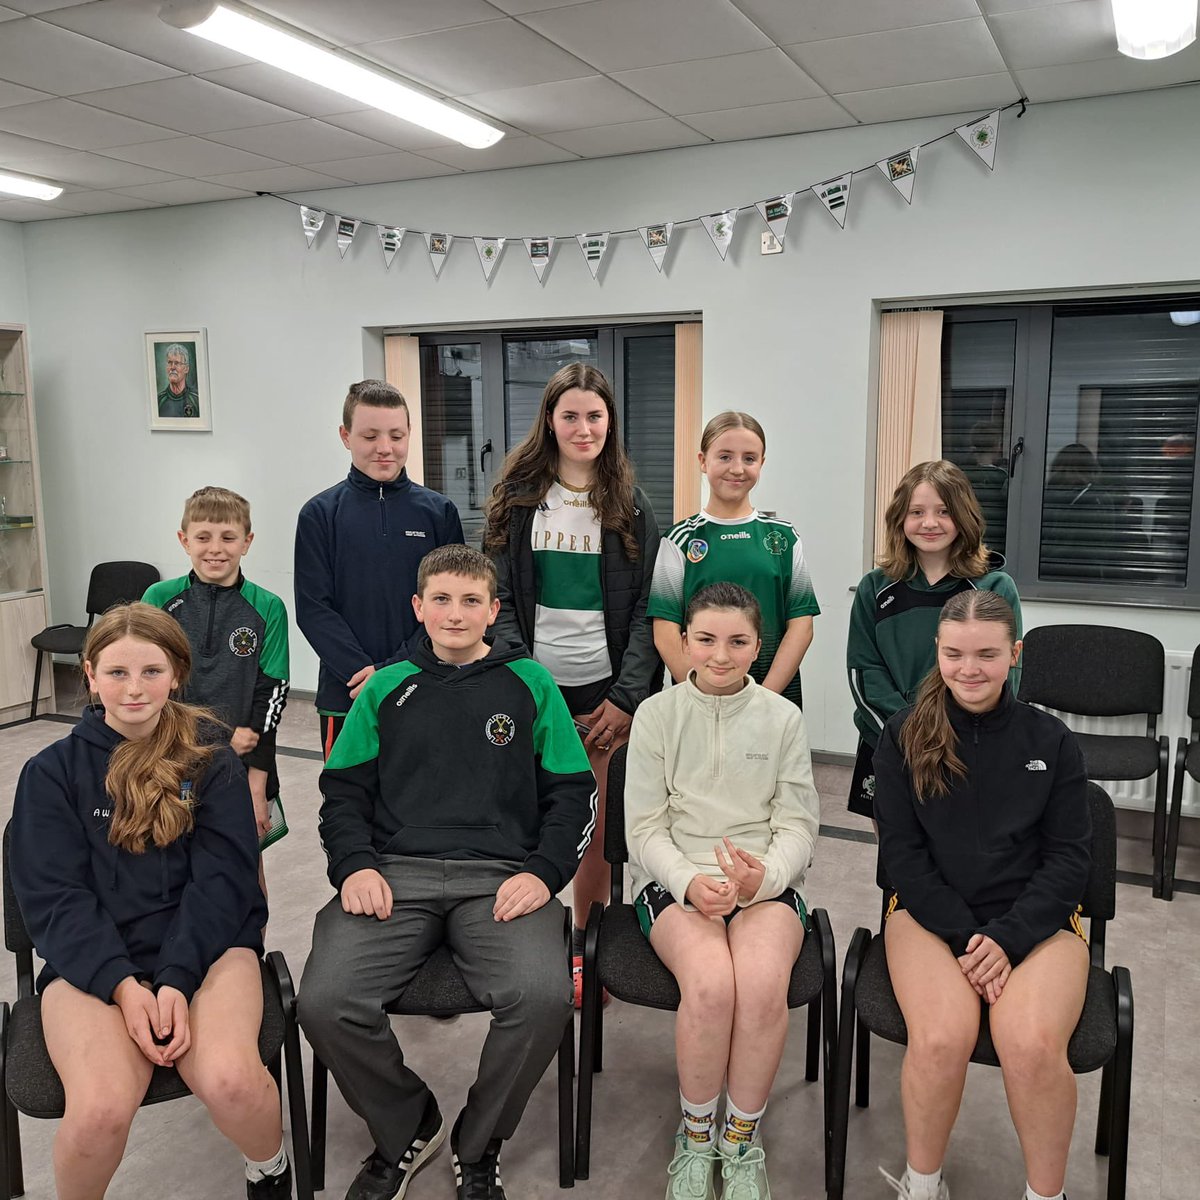 Pictured below is the newest Na Magha youth committee with Finn McGrory being elected as their Chairperson. There are also a few members missing from the picture. Maith sibh agus ádh mór gach duine. Mól an óige agus tiocfaidh sí 👏🟢⚪️⚫️